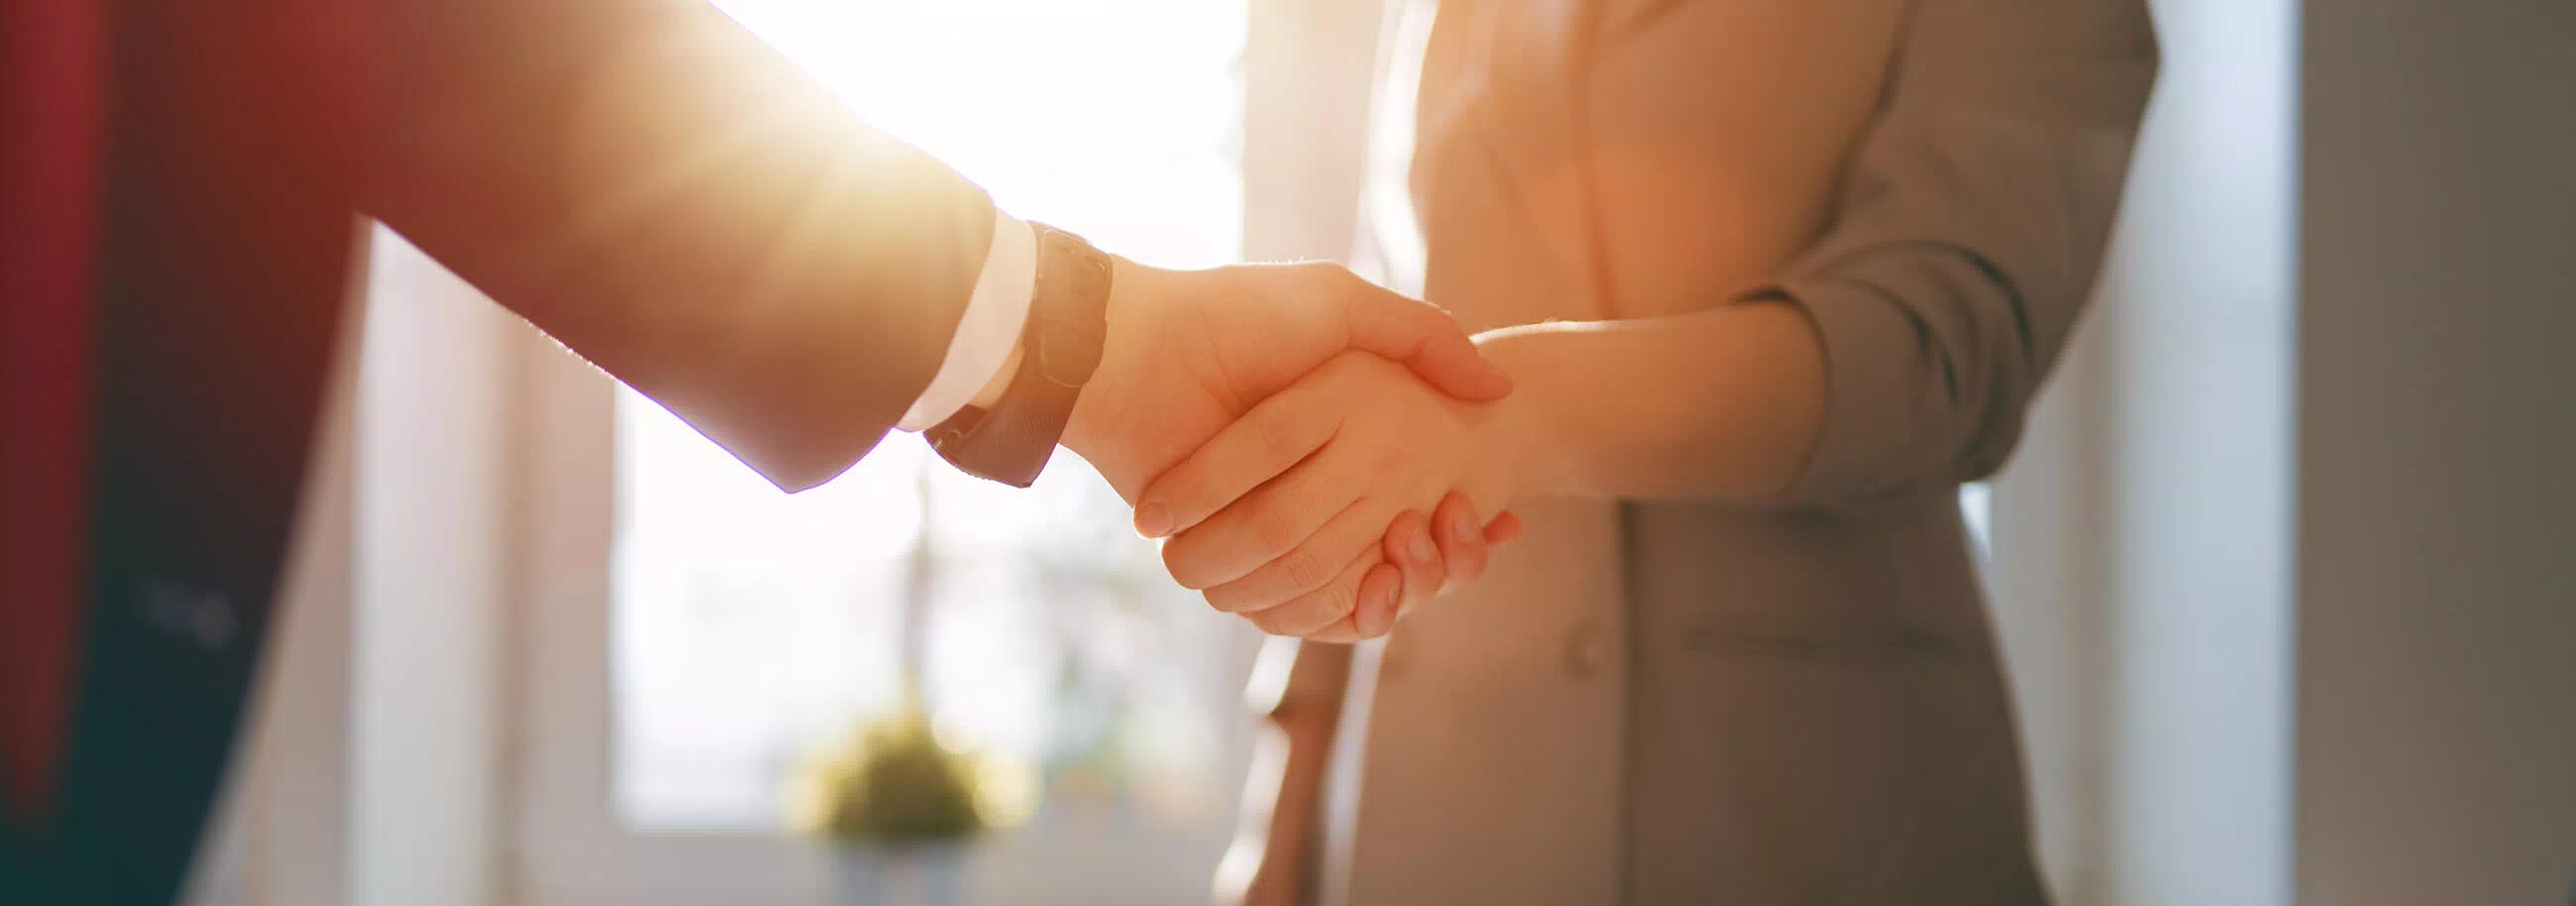 two people in a handshake with the bring sun in the background